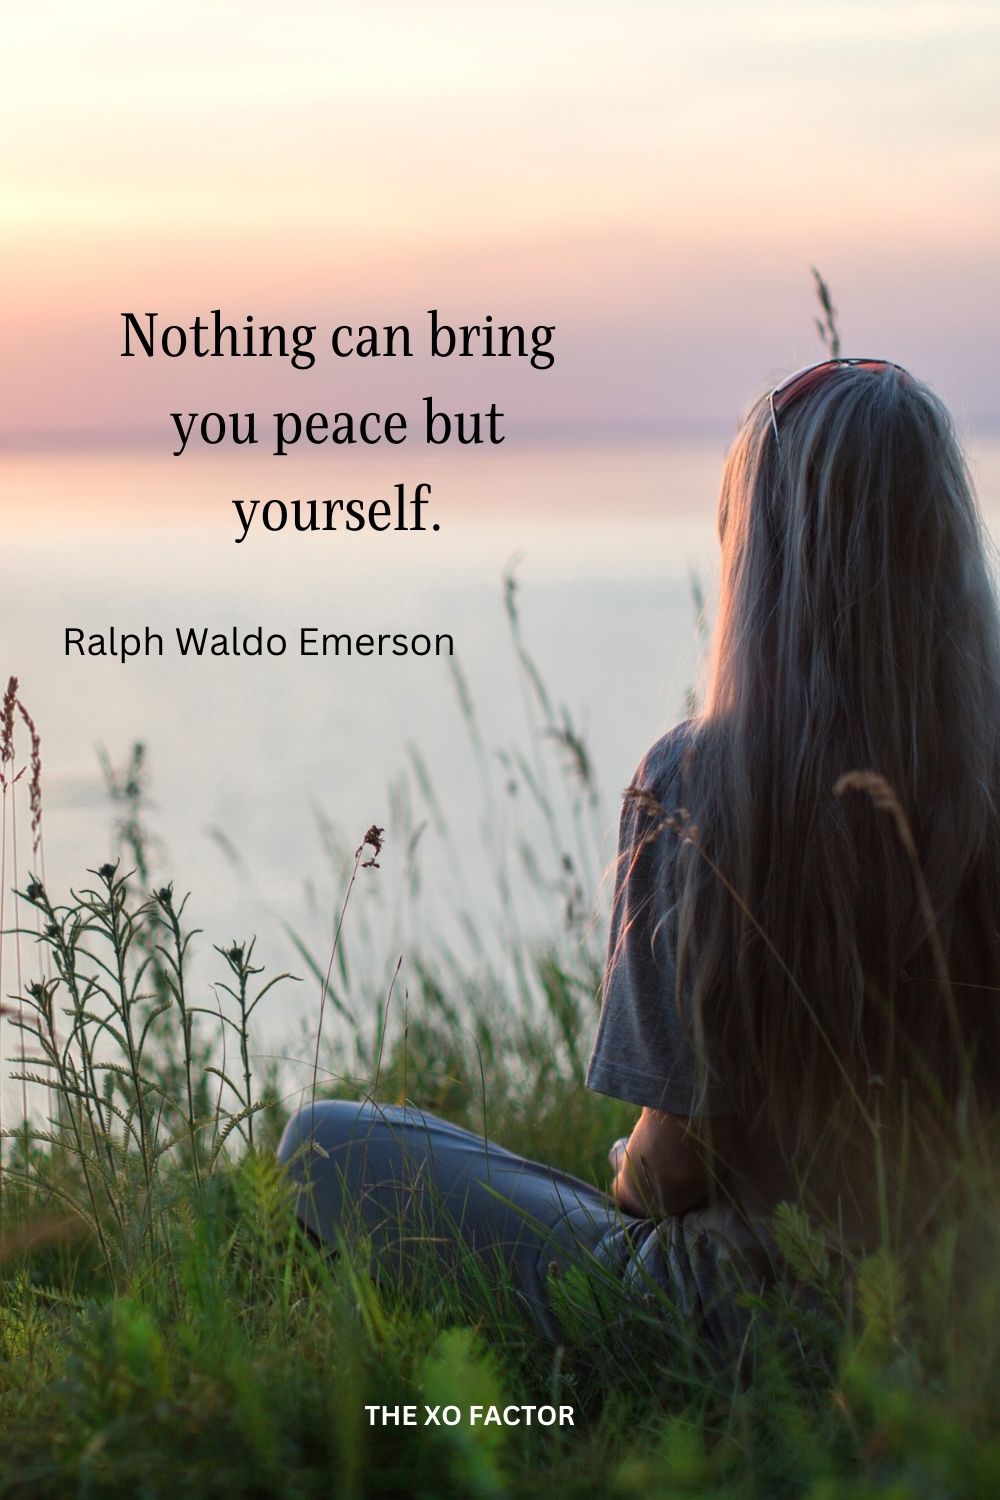 Nothing can bring you peace but yourself.
Ralph Waldo Emerson